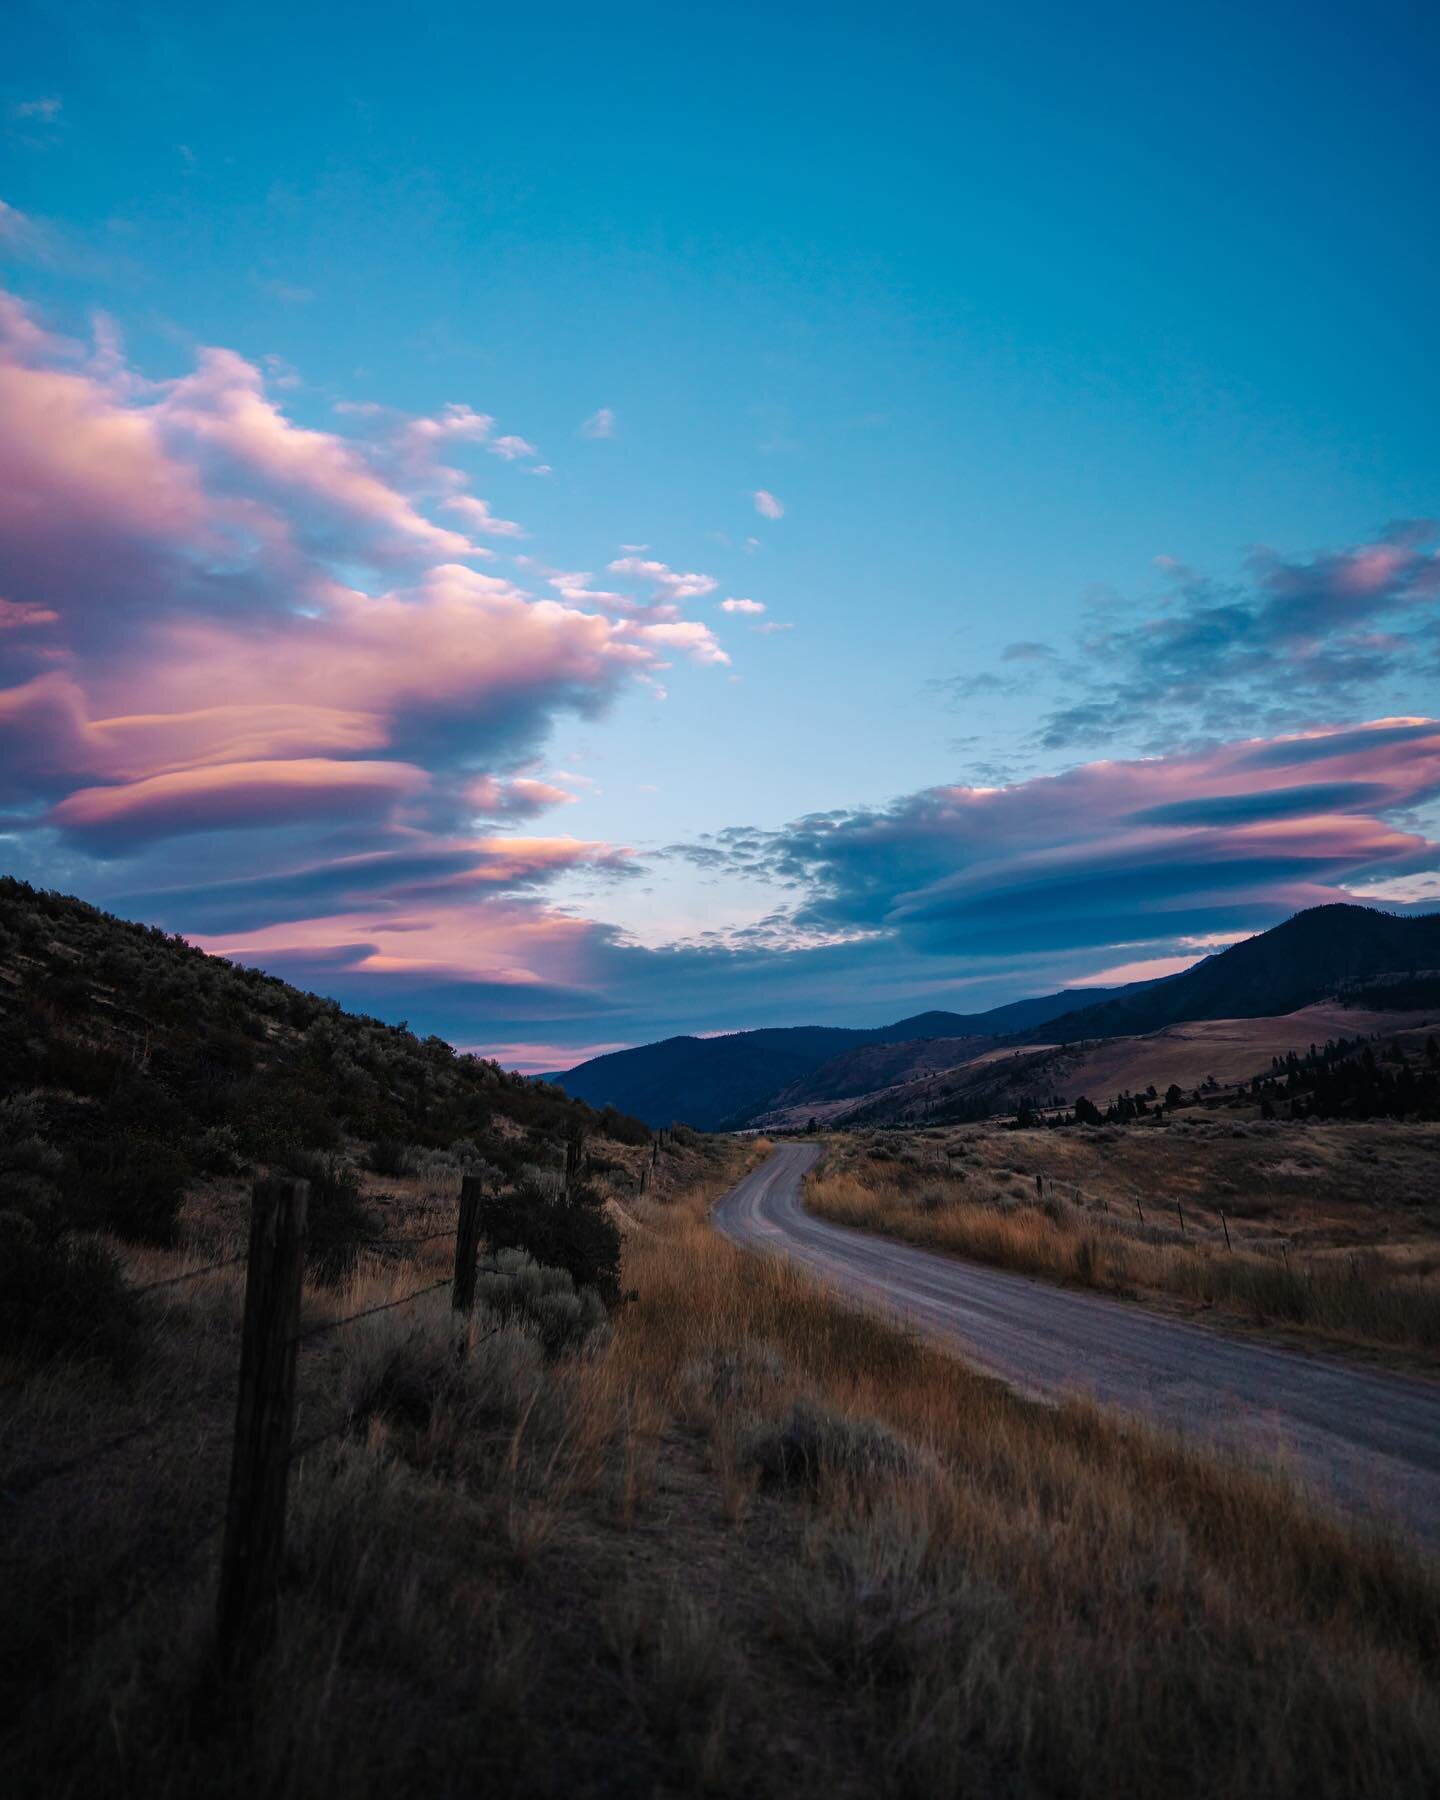 One of my favorite summertime activities growing up in Montana was driving around the gravel backroads at the end of the day. Watching the sun set around me in the peaceful countryside, dirt kicking up around the car, wildlife coming out after the he